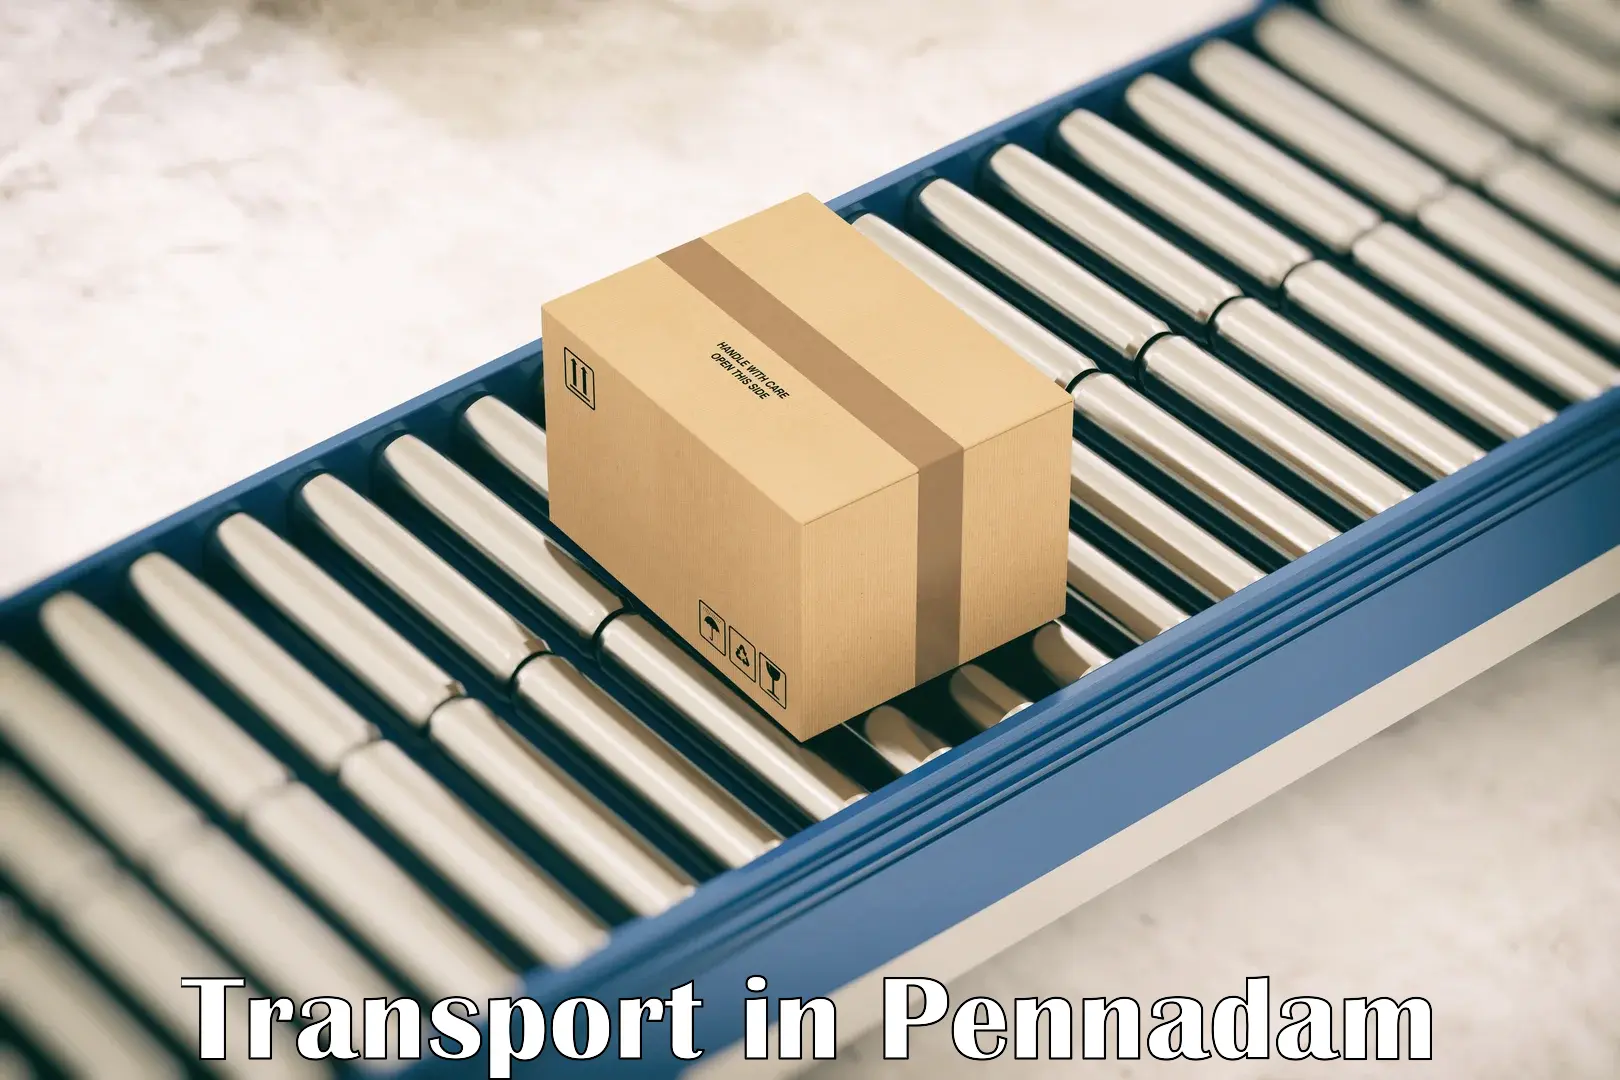 Goods delivery service in Pennadam